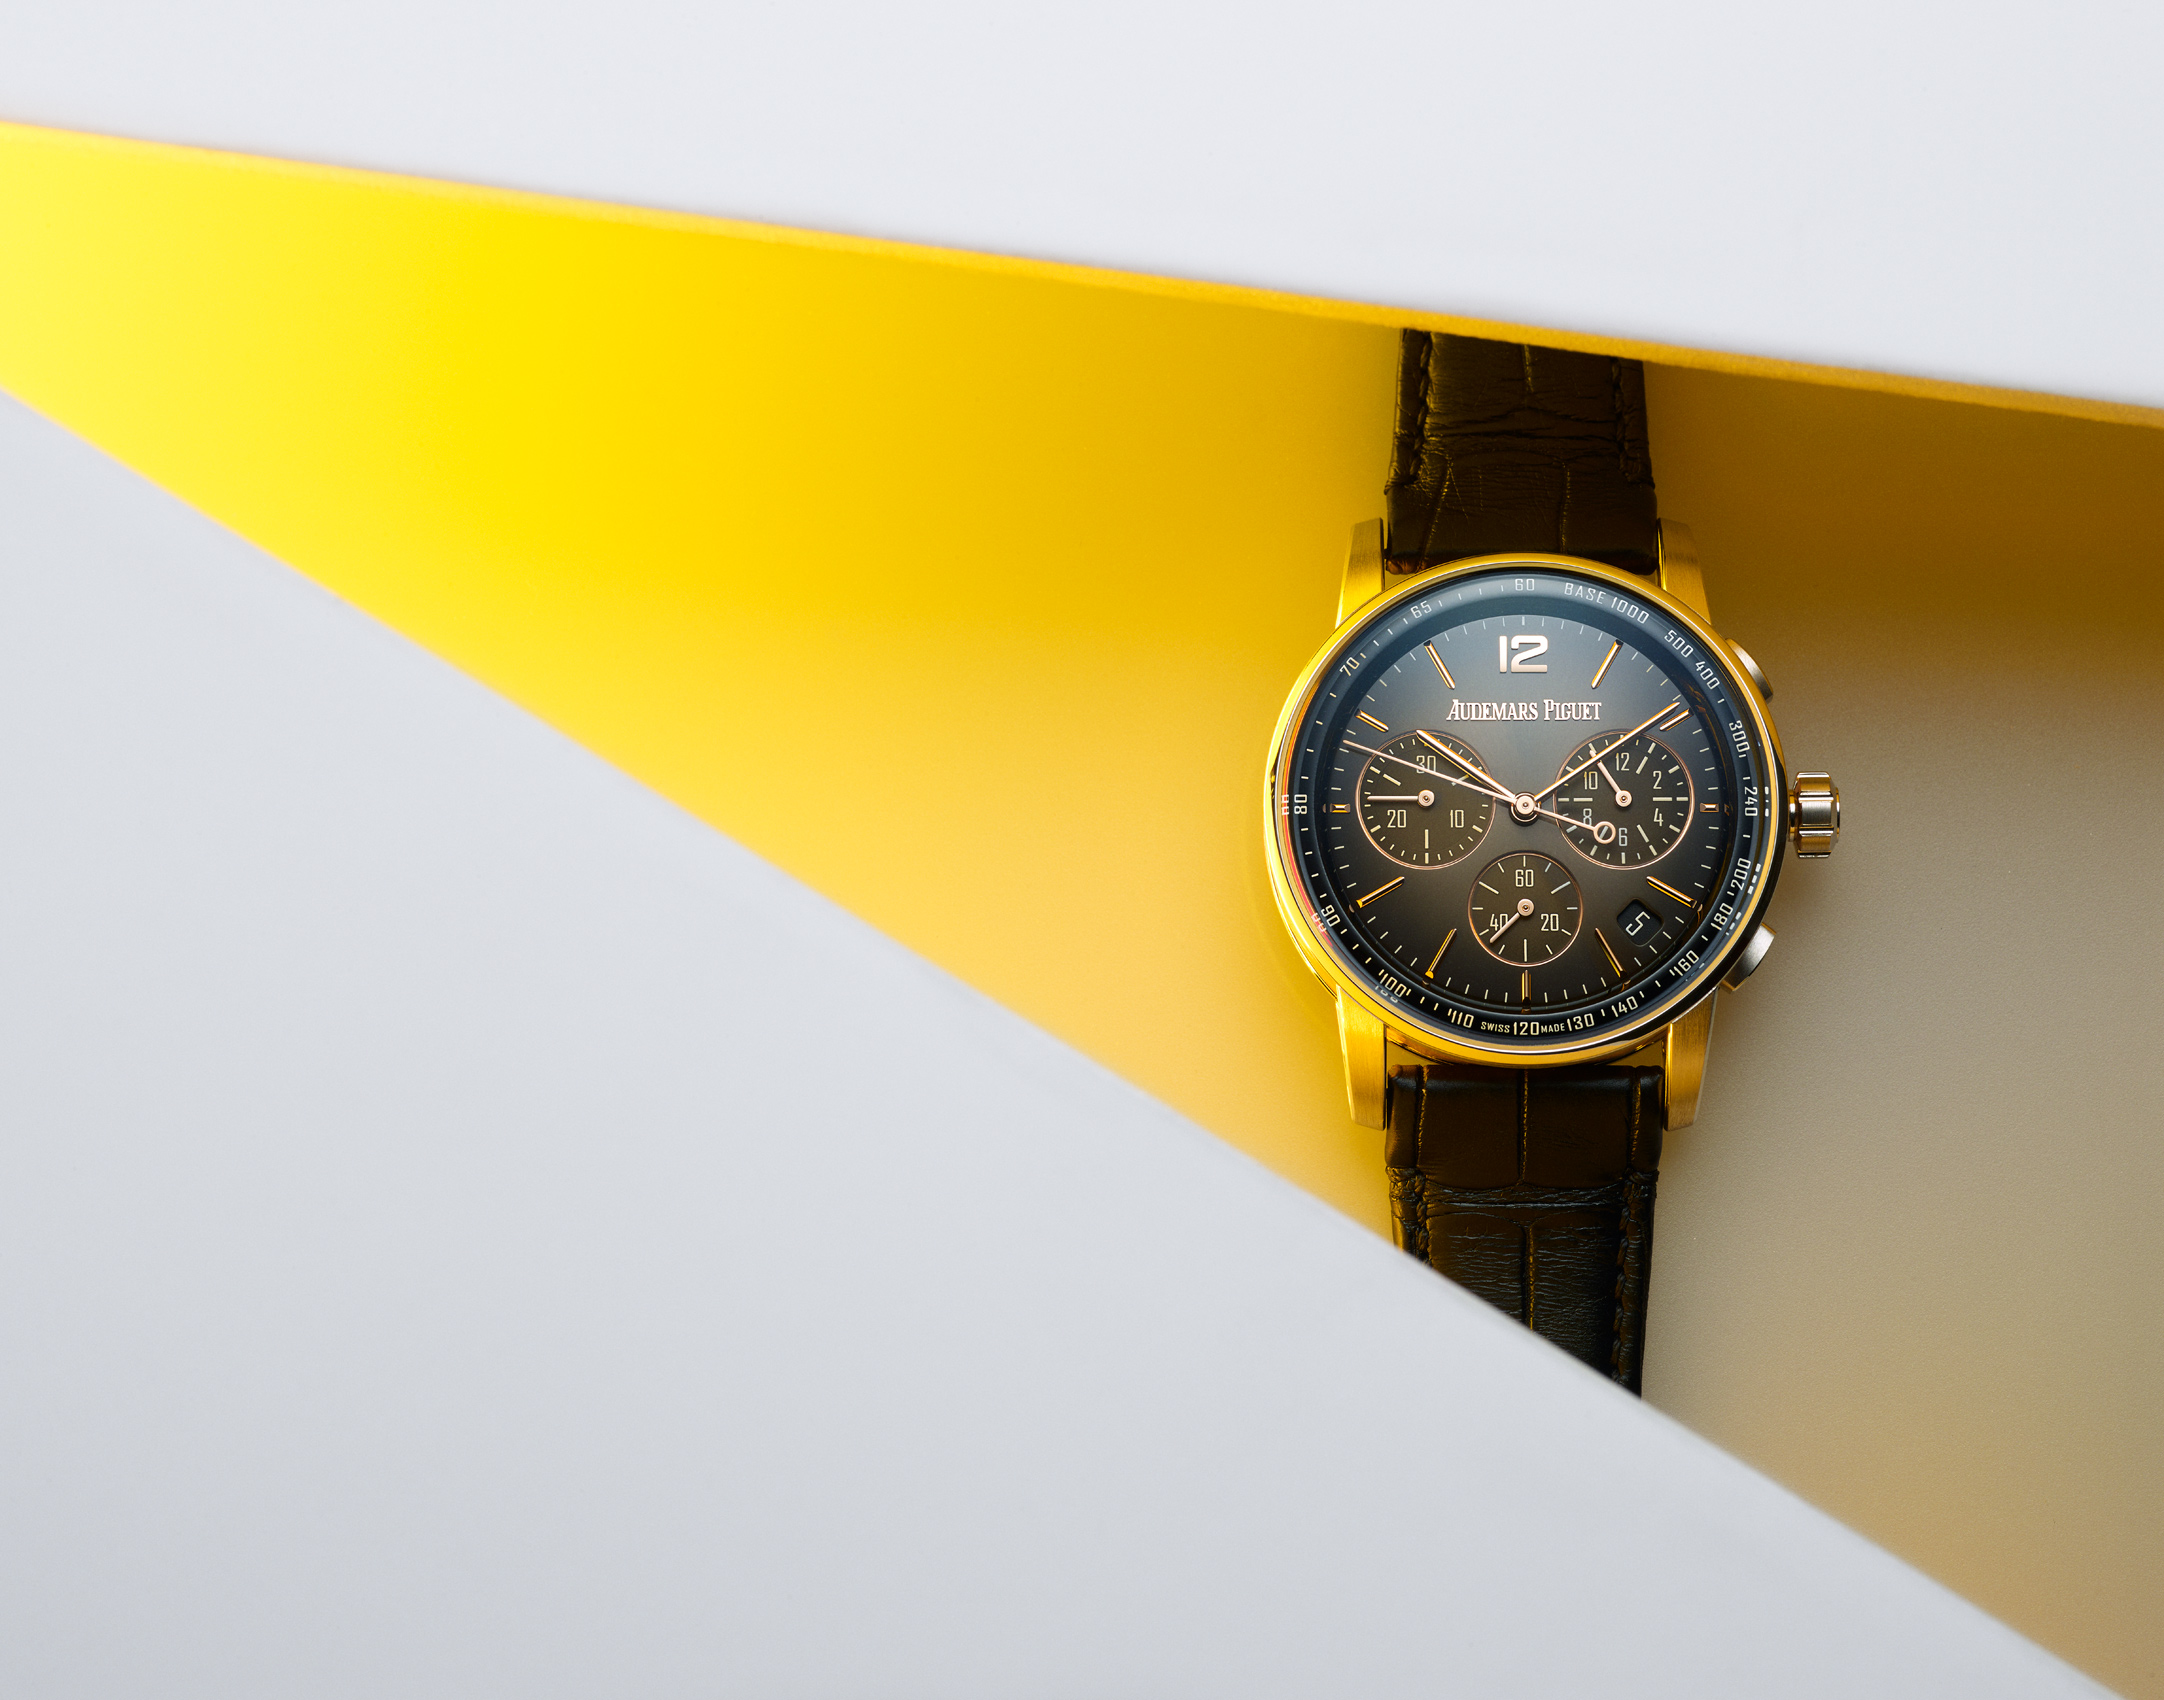 Audemars watch in yellow light beam by Alexander Kent London based still life and product photographer.